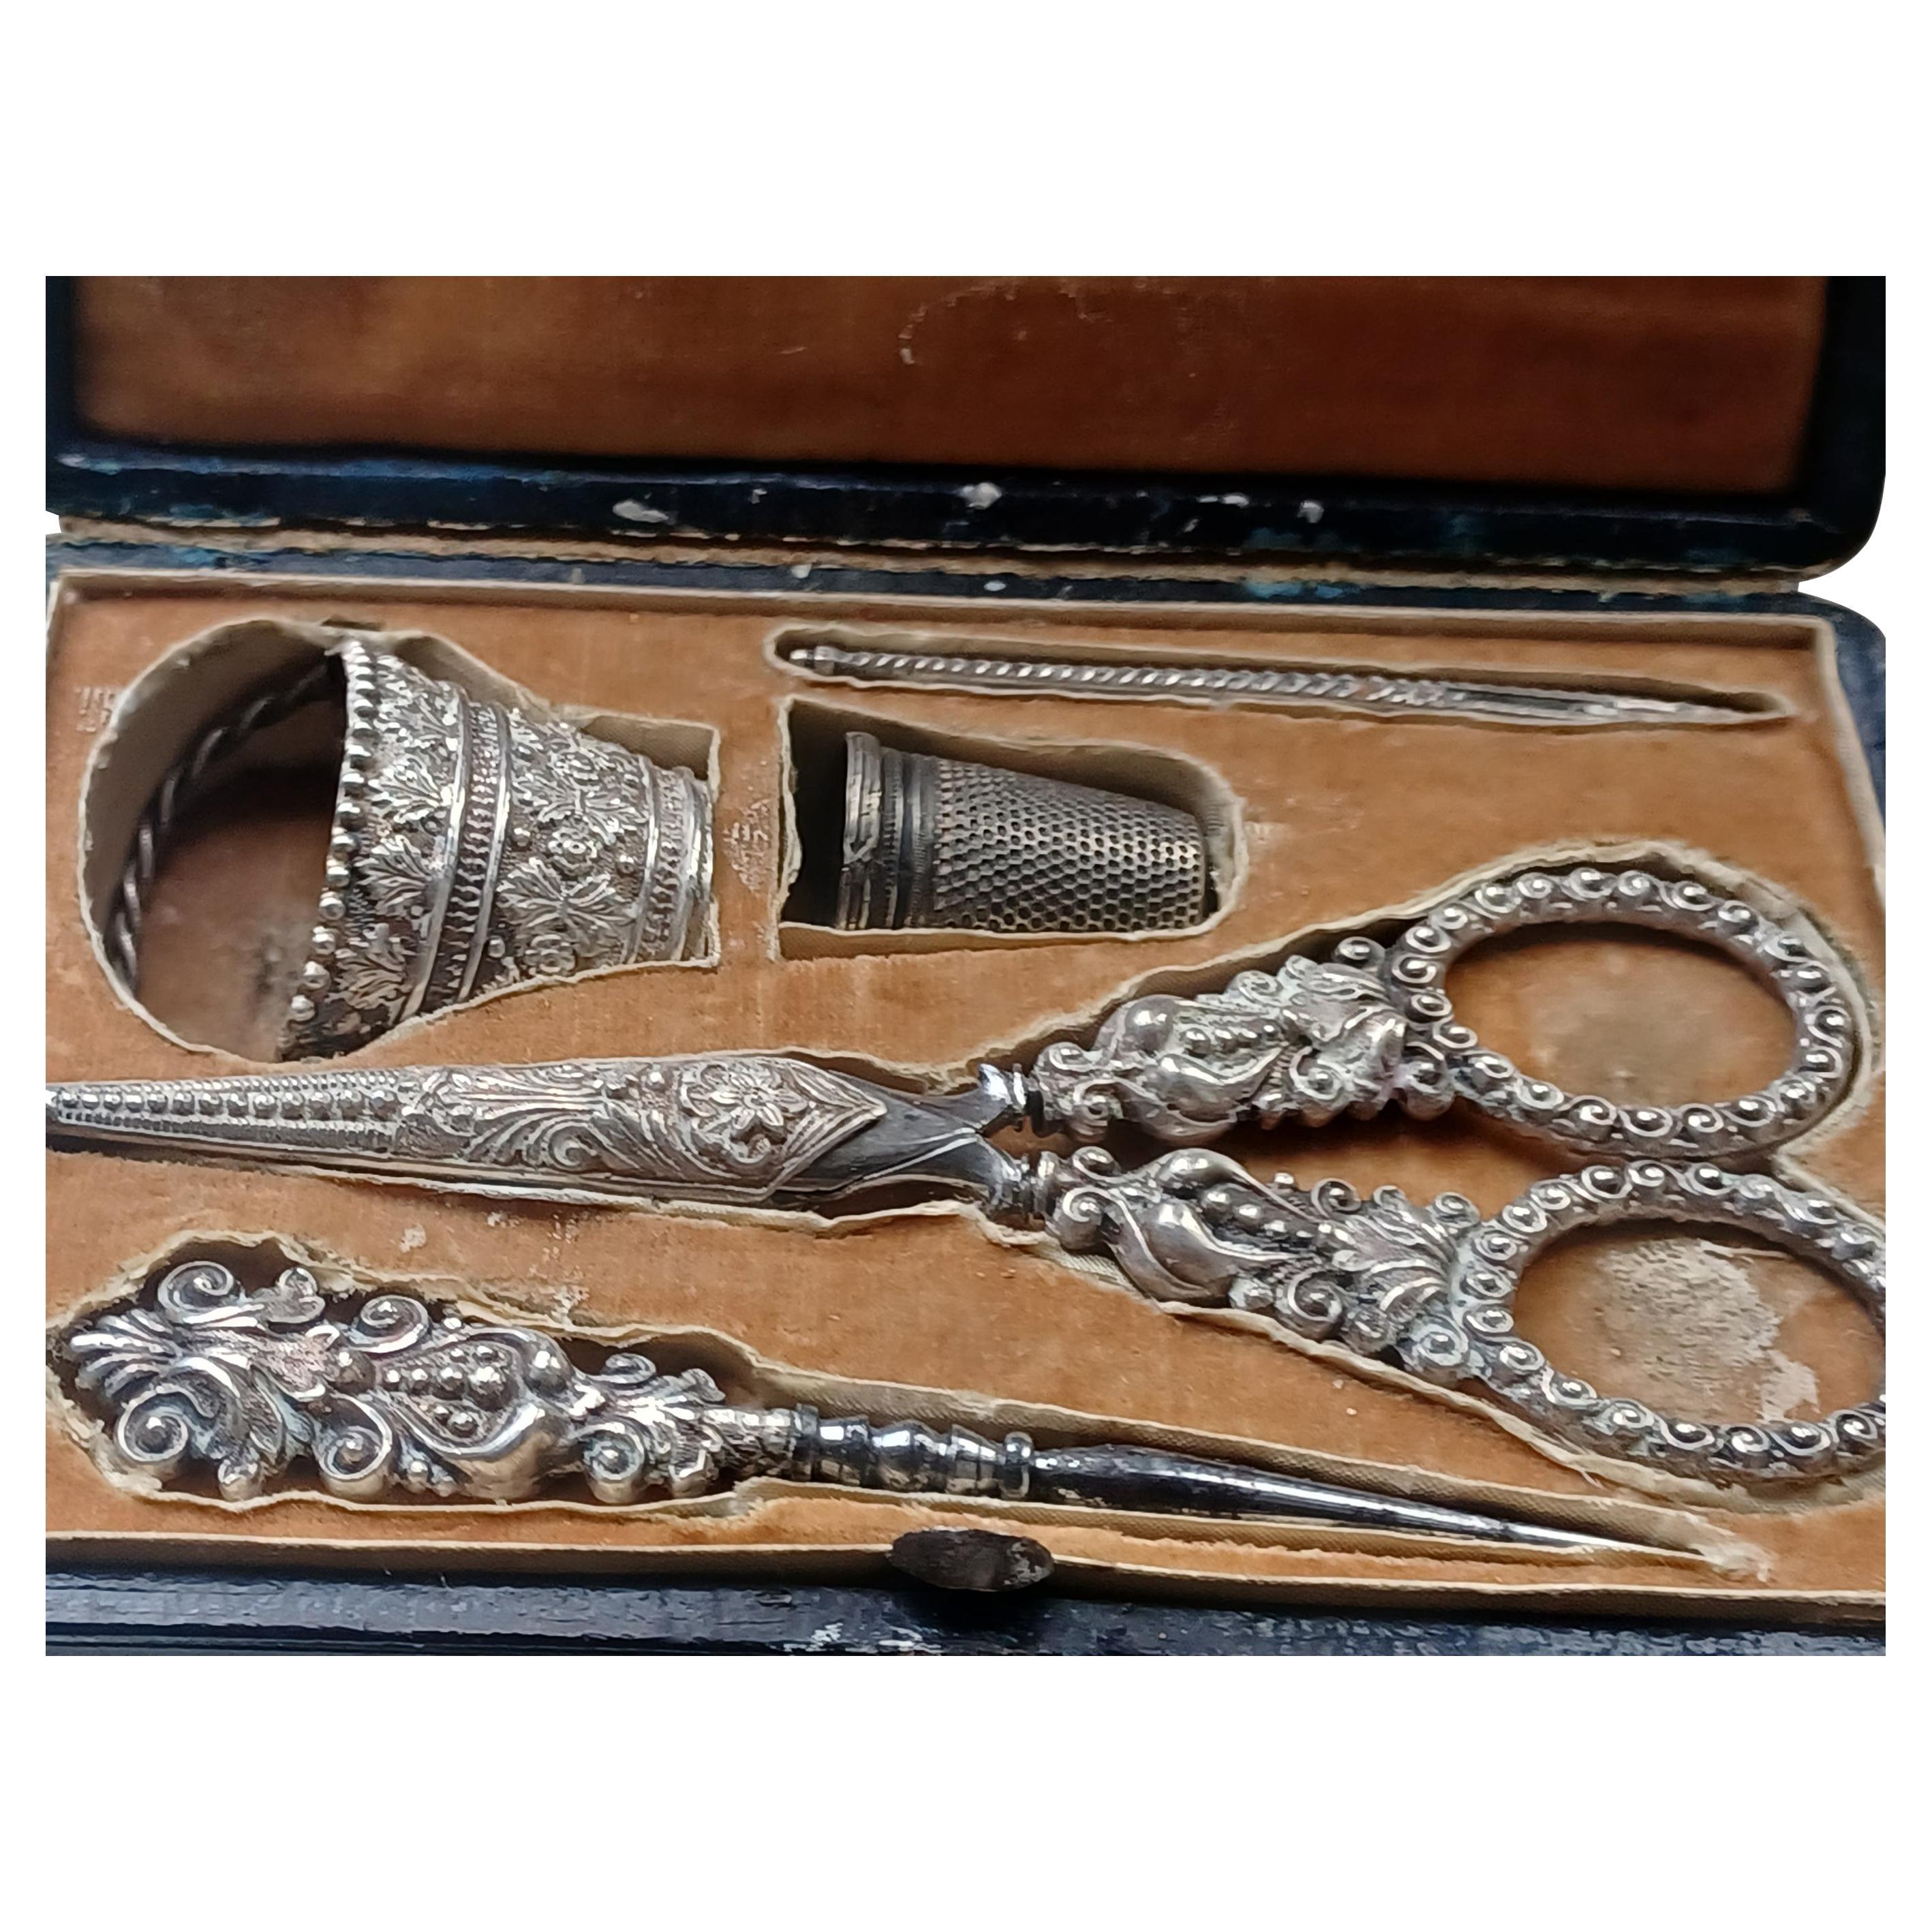 Rare Antique George IV Lady’s Sewing Necessaire with Original Case, est. 1825 In Fair Condition For Sale In London, GB